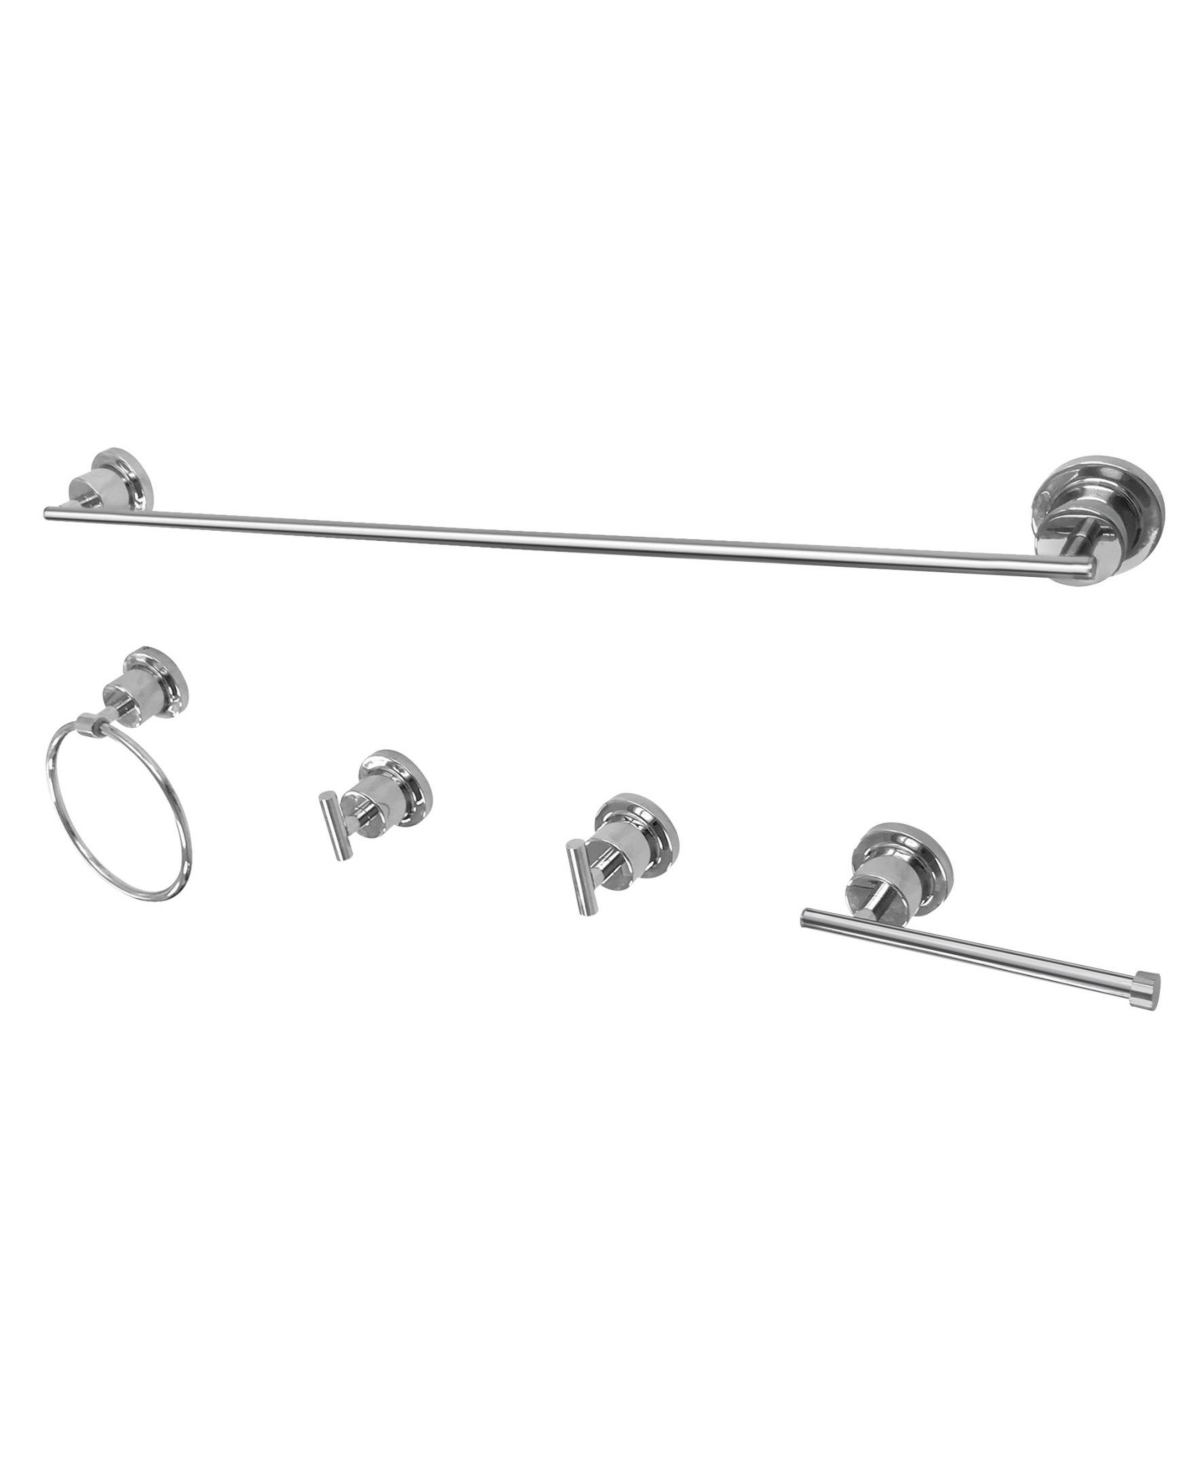 Kingston Brass 5-Pc. Bathroom Accessory Set in Polished Chrome Bedding